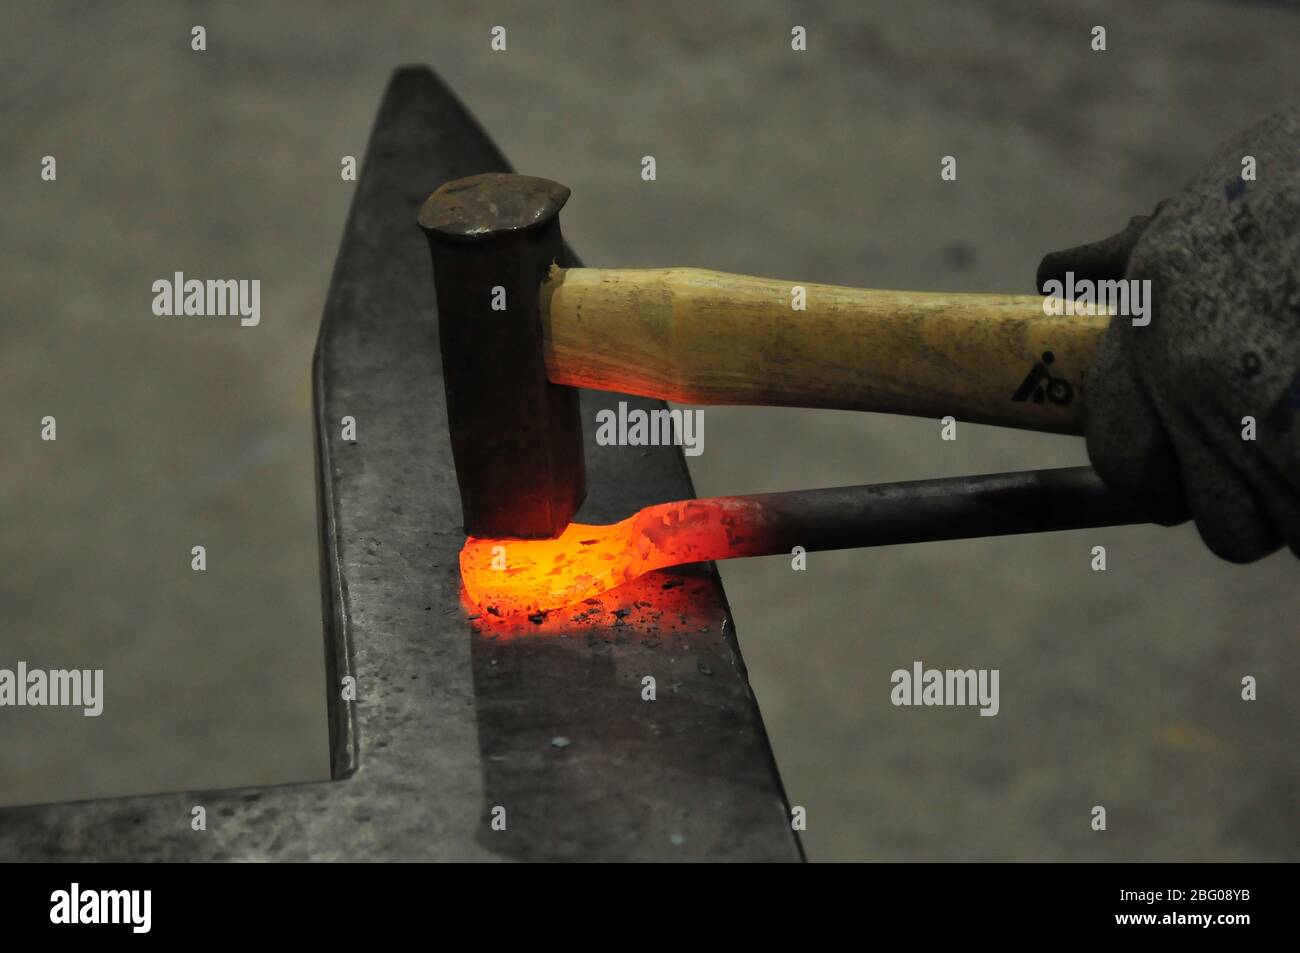 Iron forging on an anvil Stock Photo